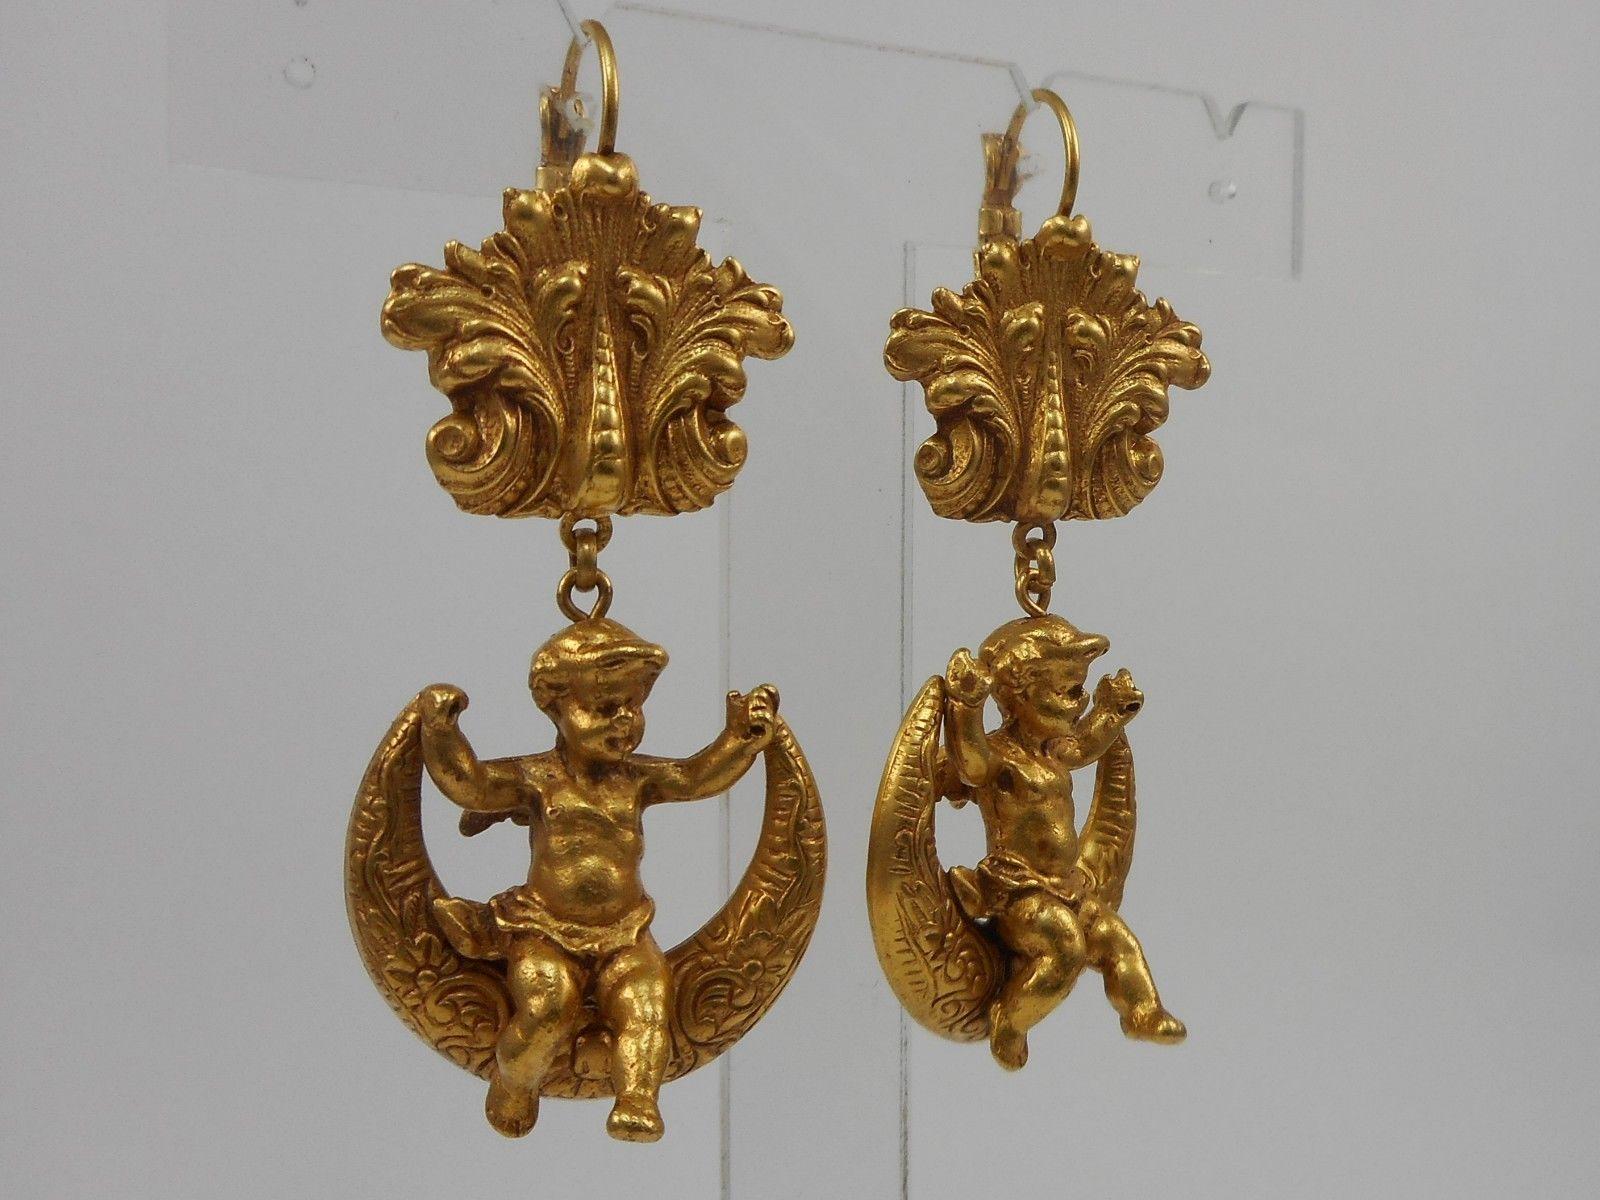 Wonderful pair of Cherub and Moon Dangle Earrings; Antiqued Gilt Brass; Cherubs are sitting on embossed Crescent Moons suspended from lever back earring fittings decorated with brass scrolls. Earrings measure approx. 2.50'' X 1.00''. Signed: ASKEW